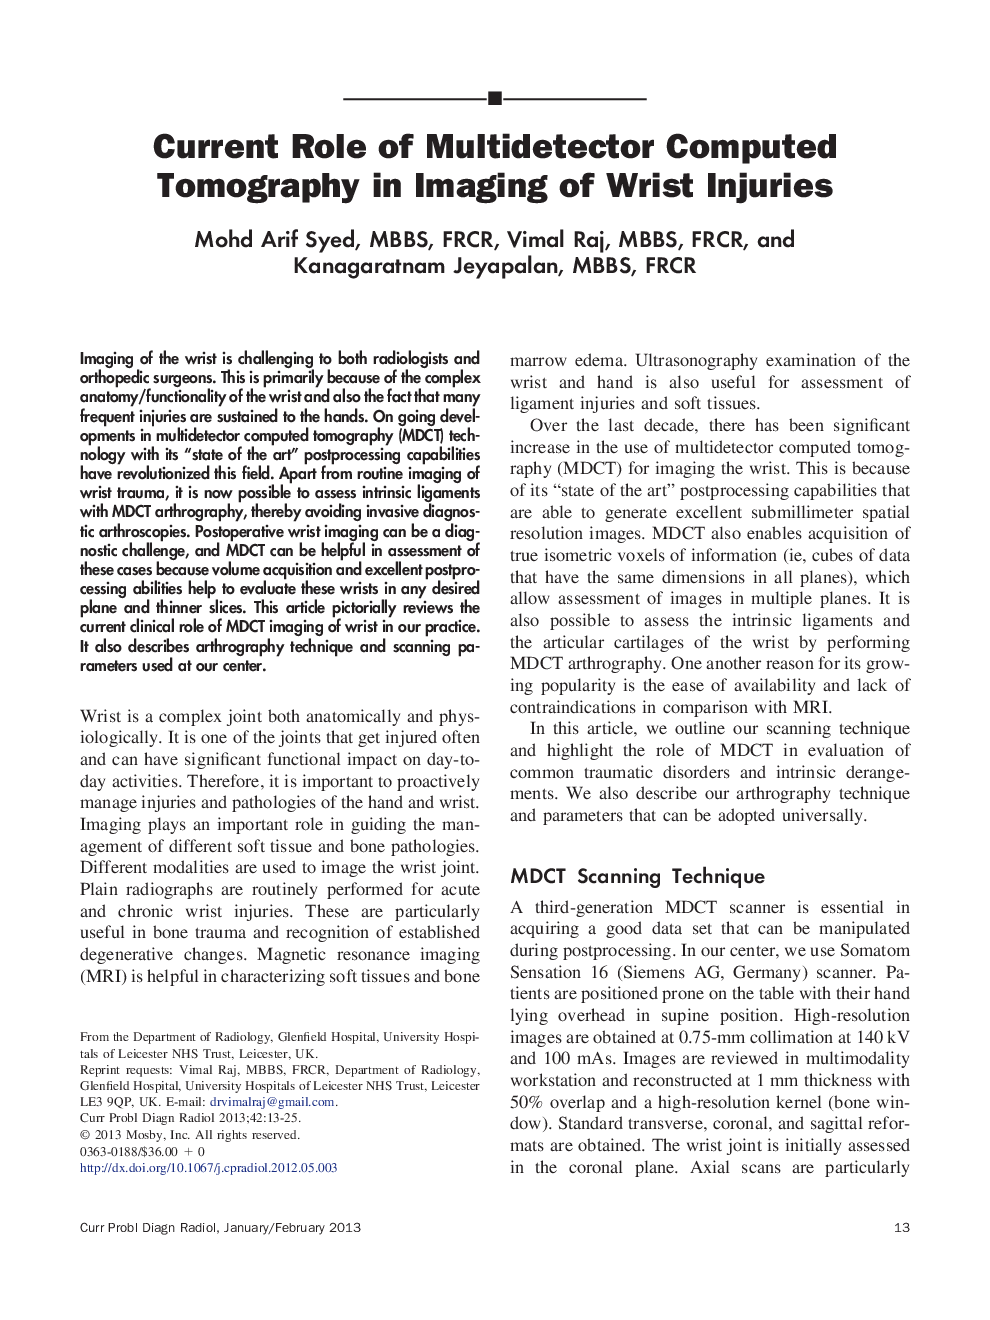 Current Role of Multidetector Computed Tomography in Imaging of Wrist Injuries